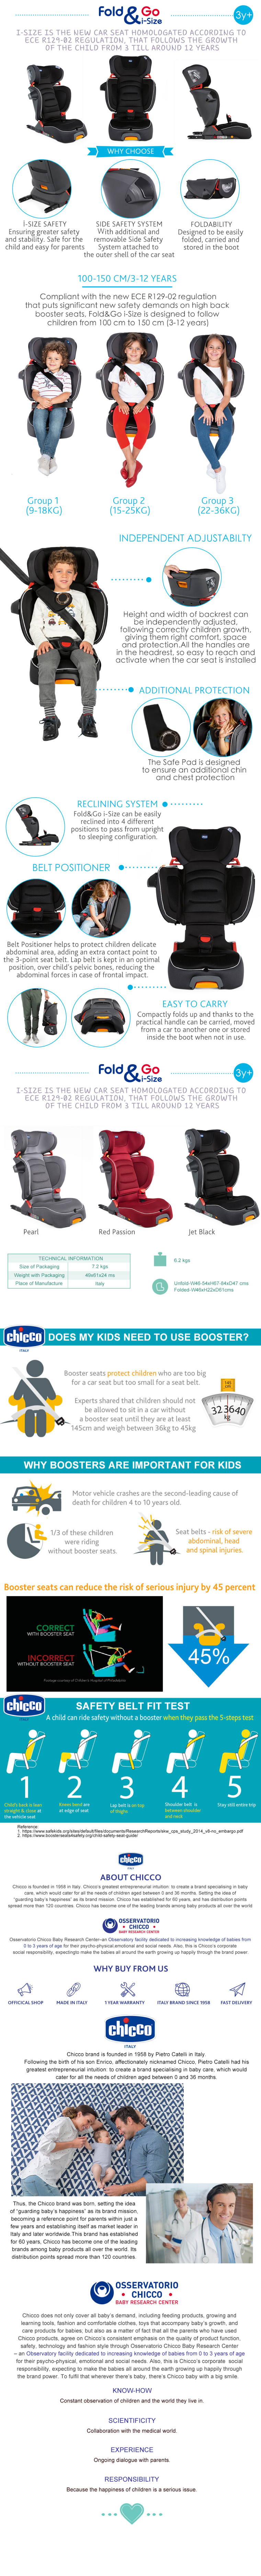 Chicco Fold and Go I-Size Booster Car Seat(ECE R129)